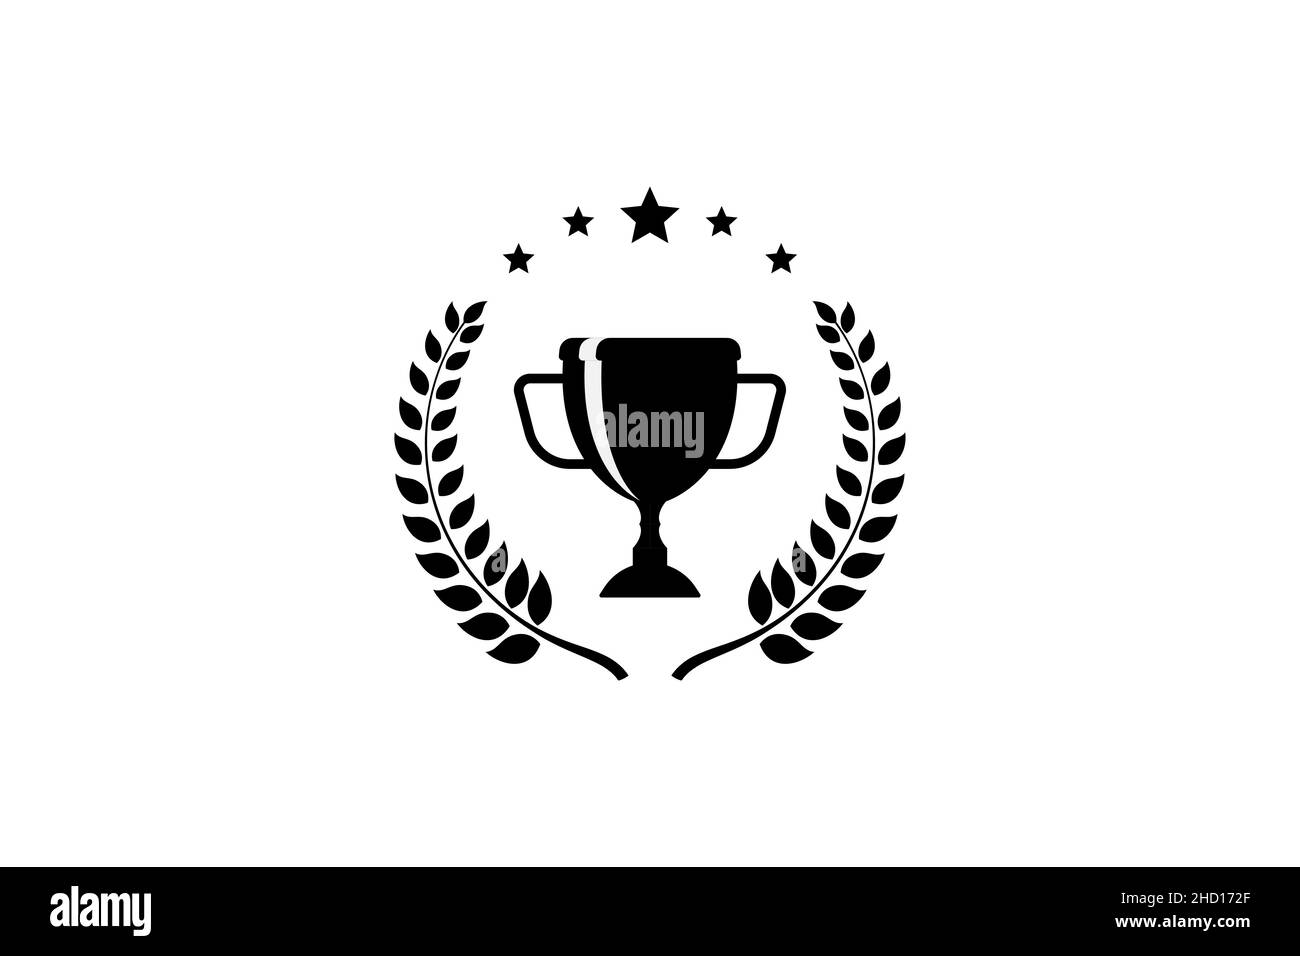 Best champions cup trophy vector design. Champion cup winner trophy award with laurel wreath Stock Photo